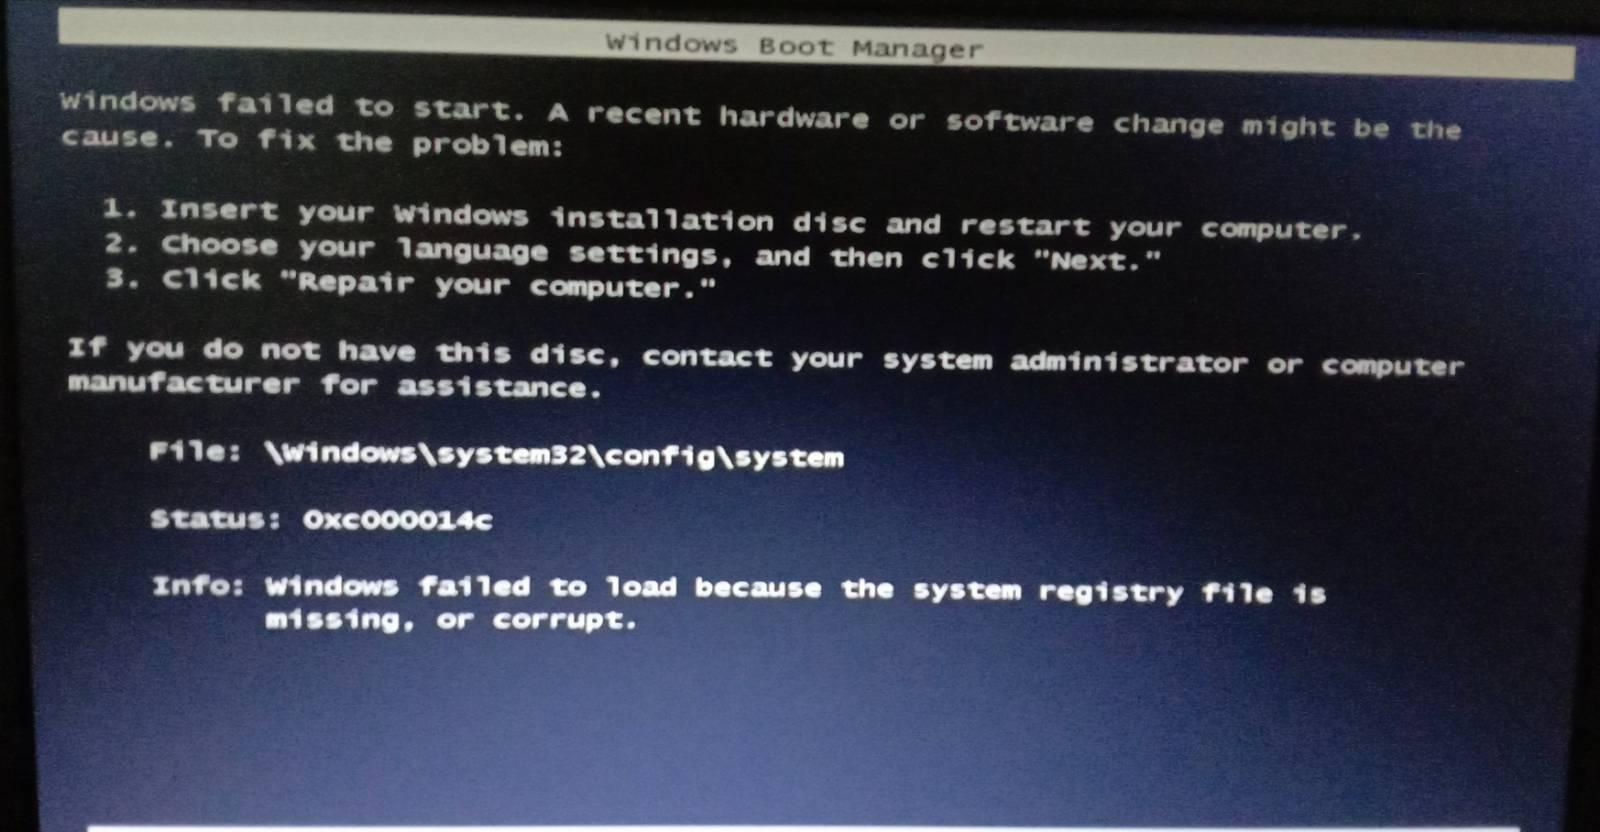 windows failed to load because the system registry